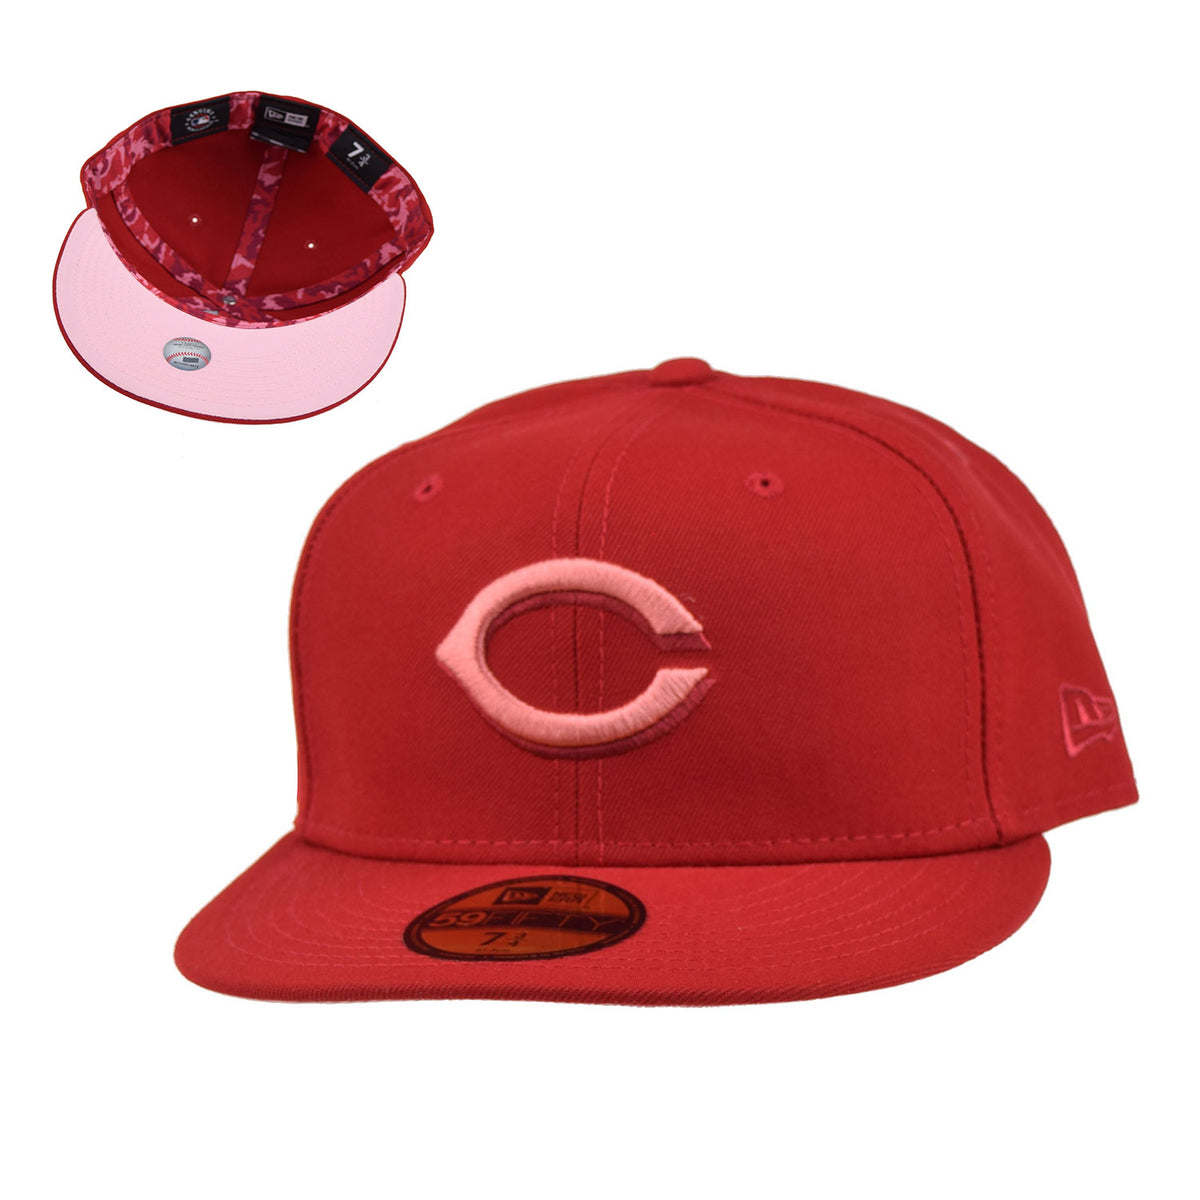 New Era Cincinnati Reds 59FIFTY Authentic Collection Hat Black/Red 7 1/8